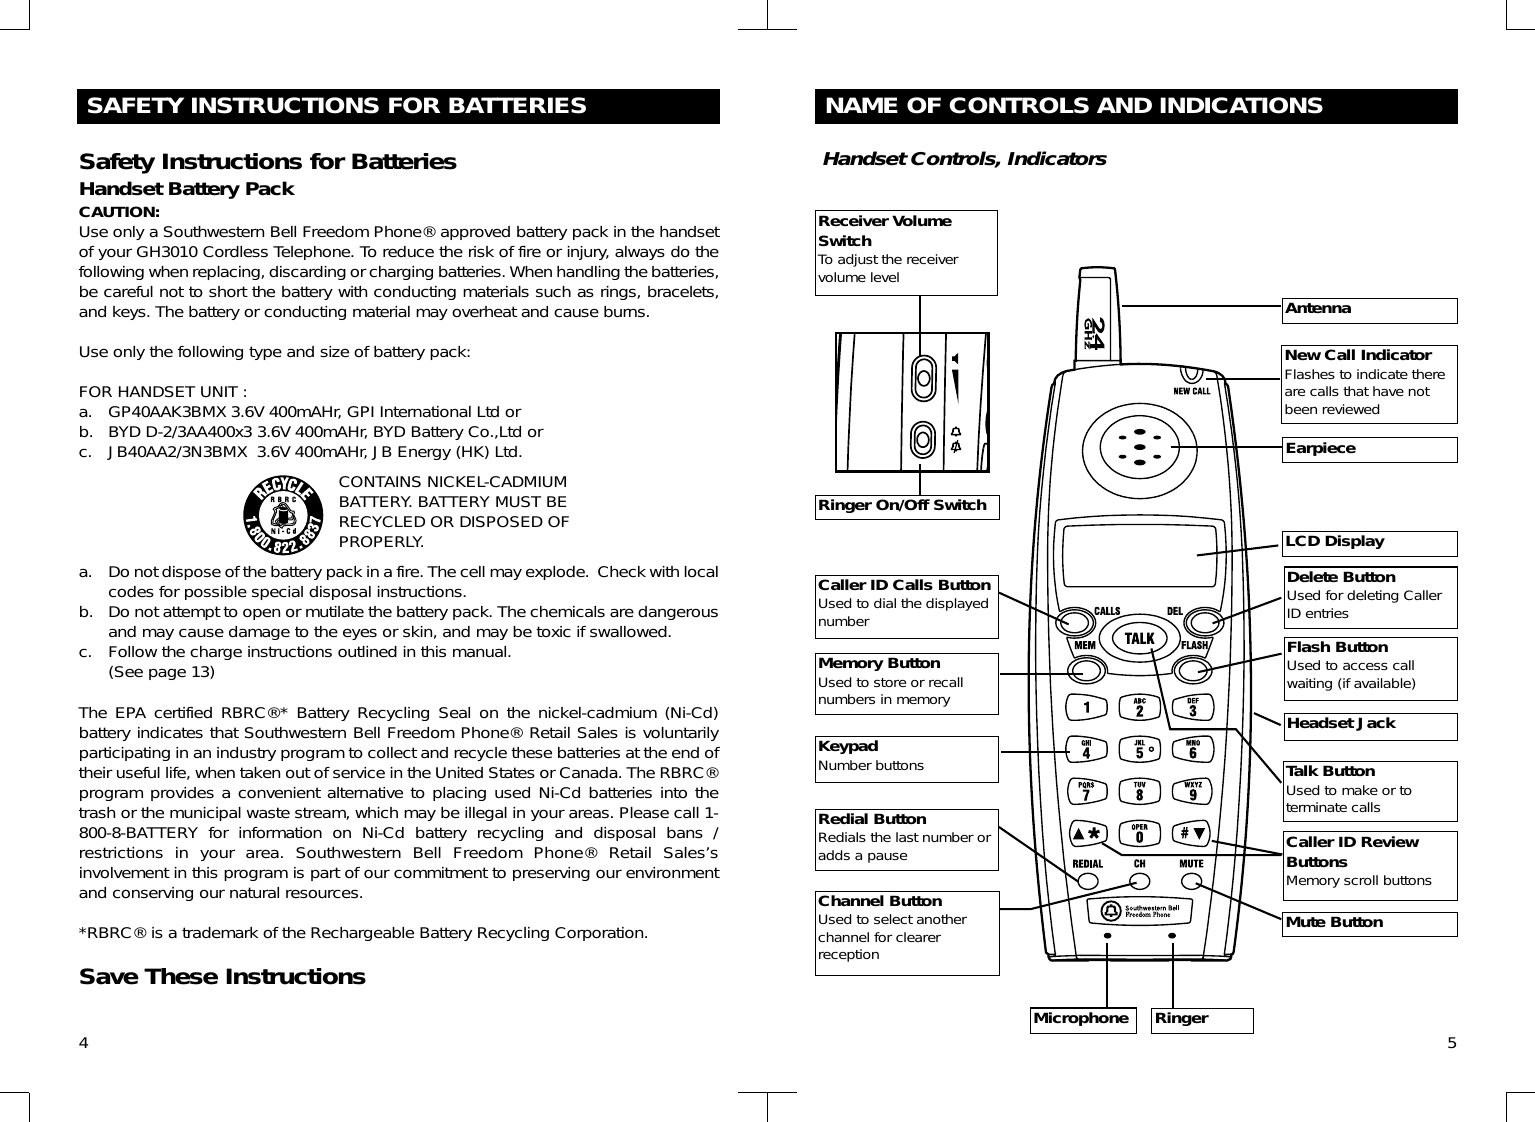 4SAFETY INSTRUCTIONS FOR BATTERIESSafety Instructions for BatteriesHandset Battery PackCAUTION:Use only a Southwestern Bell Freedom Phone® approved battery pack in the handsetof your GH3010 Cordless Telephone. To reduce the risk of fire or injury, always do thefollowing when replacing, discarding or charging batteries. When handling the batteries,be careful not to short the battery with conducting materials such as rings, bracelets,and keys. The battery or conducting material may overheat and cause burns.Use only the following type and size of battery pack:FOR HANDSET UNIT :a. GP40AAK3BMX 3.6V 400mAHr, GPI International Ltd orb. BYD D-2/3AA400x3 3.6V 400mAHr, BYD Battery Co.,Ltd orc. JB40AA2/3N3BMX  3.6V 400mAHr, JB Energy (HK) Ltd.a. Do not dispose of the battery pack in a fire. The cell may explode.  Check with localcodes for possible special disposal instructions.b. Do not attempt to open or mutilate the battery pack. The chemicals are dangerousand may cause damage to the eyes or skin, and may be toxic if swallowed.c. Follow the charge instructions outlined in this manual.(See page 13)The EPA certified RBRC®* Battery Recycling Seal on the nickel-cadmium (Ni-Cd)battery indicates that Southwestern Bell Freedom Phone® Retail Sales is voluntarilyparticipating in an industry program to collect and recycle these batteries at the end oftheir useful life, when taken out of service in the United States or Canada. The RBRC®program provides a convenient alternative to placing used Ni-Cd batteries into thetrash or the municipal waste stream, which may be illegal in your areas. Please call 1-800-8-BATTERY for information on Ni-Cd battery recycling and disposal bans /restrictions in your area. Southwestern Bell Freedom Phone® Retail Sales’sinvolvement in this program is part of our commitment to preserving our environmentand conserving our natural resources.*RBRC® is a trademark of the Rechargeable Battery Recycling Corporation.Save These InstructionsCONTAINS NICKEL-CADMIUMBATTERY. BATTERY MUST BERECYCLED OR DISPOSED OFPROPERLY.5NAME OF CONTROLS AND INDICATIONSHandset Controls, IndicatorsAntennaEarpieceLCD DisplayNew Call IndicatorFlashes to indicate thereare calls that have notbeen reviewedMemory ButtonUsed to store or recallnumbers in memoryDelete ButtonUsed for deleting CallerID entriesRedial ButtonRedials the last number oradds a pauseFlash ButtonUsed to access callwaiting (if available)MicrophoneReceiver VolumeSwitchTo adjust the receivervolume levelRinger On/Off SwitchCaller ID ReviewButtonsMemory scroll buttonsCaller ID Calls ButtonUsed to dial the displayednumberTalk ButtonUsed to make or toterminate callsKeypadNumber buttonsChannel ButtonUsed to select anotherchannel for clearerreceptionMute ButtonRingerHeadset Jack